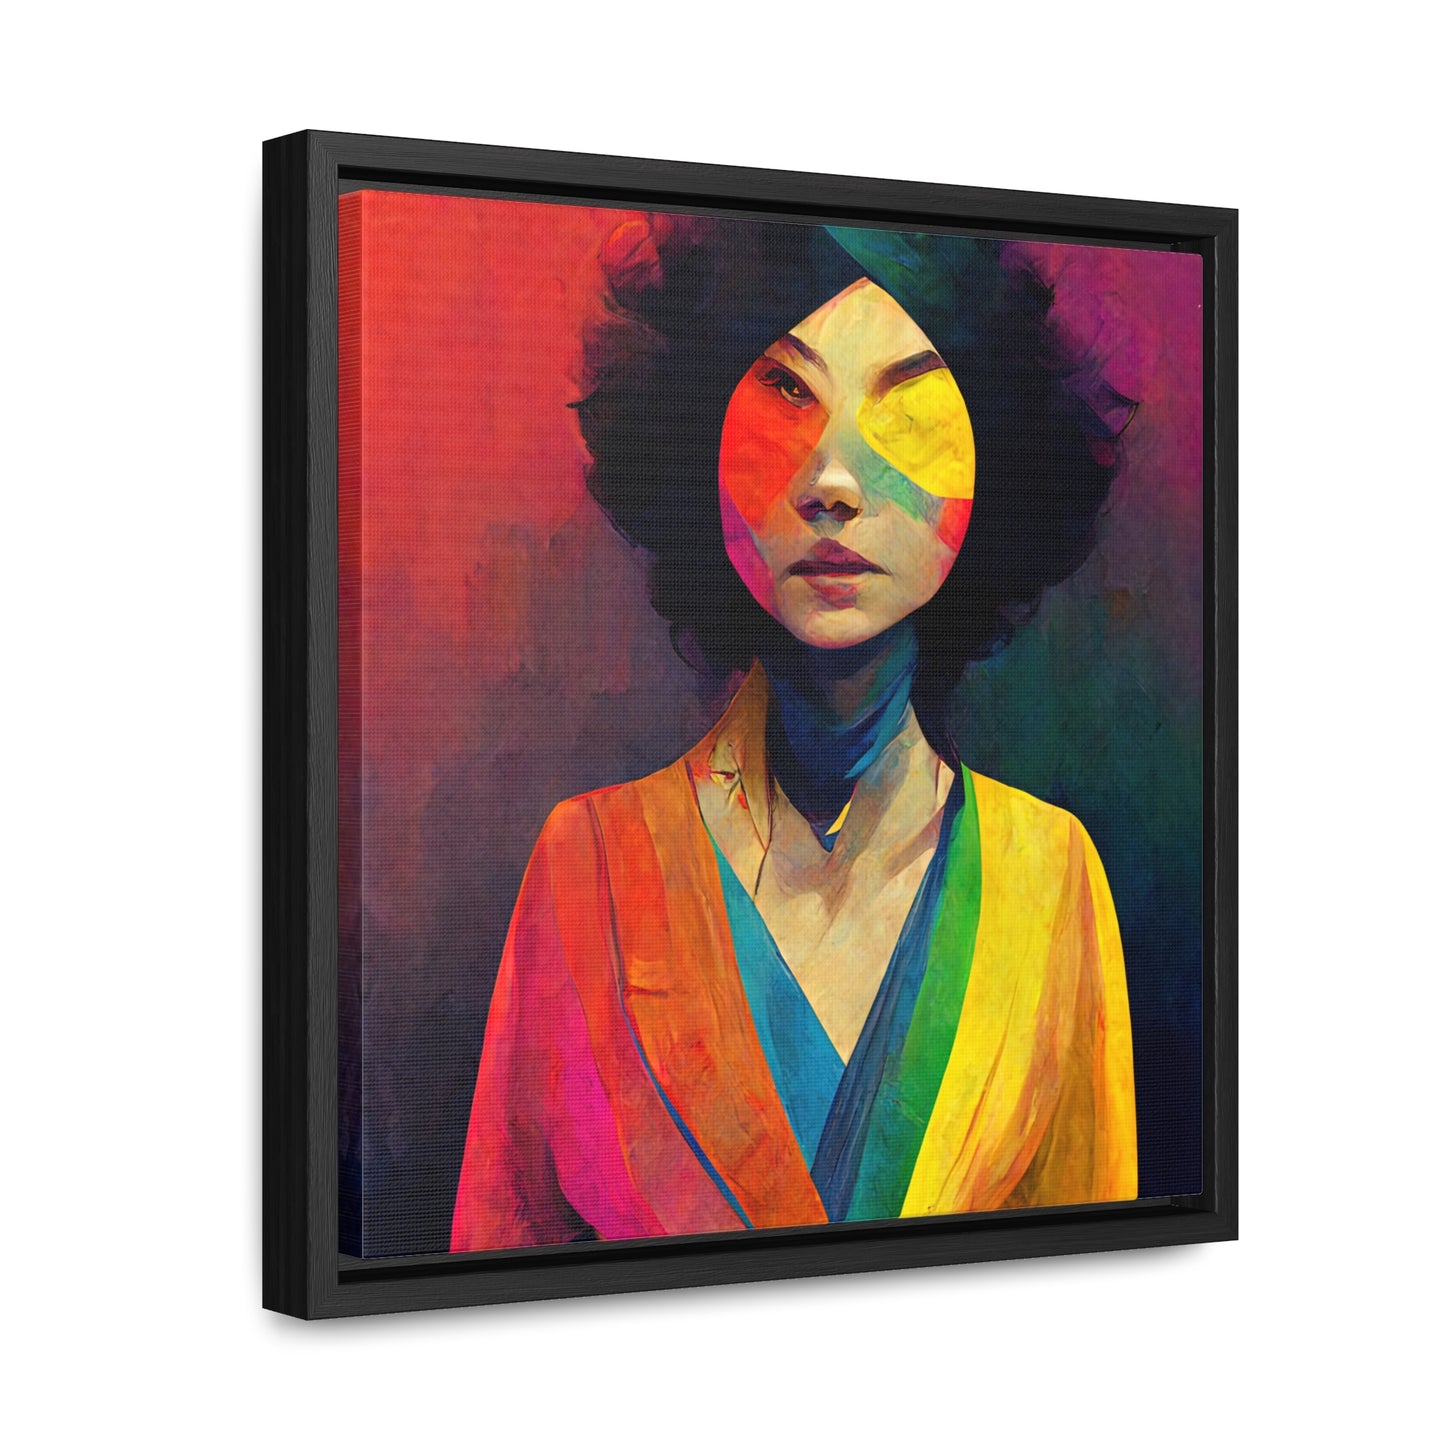 Lady's faces 22, Valentinii, Gallery Canvas Wraps, Square Frame